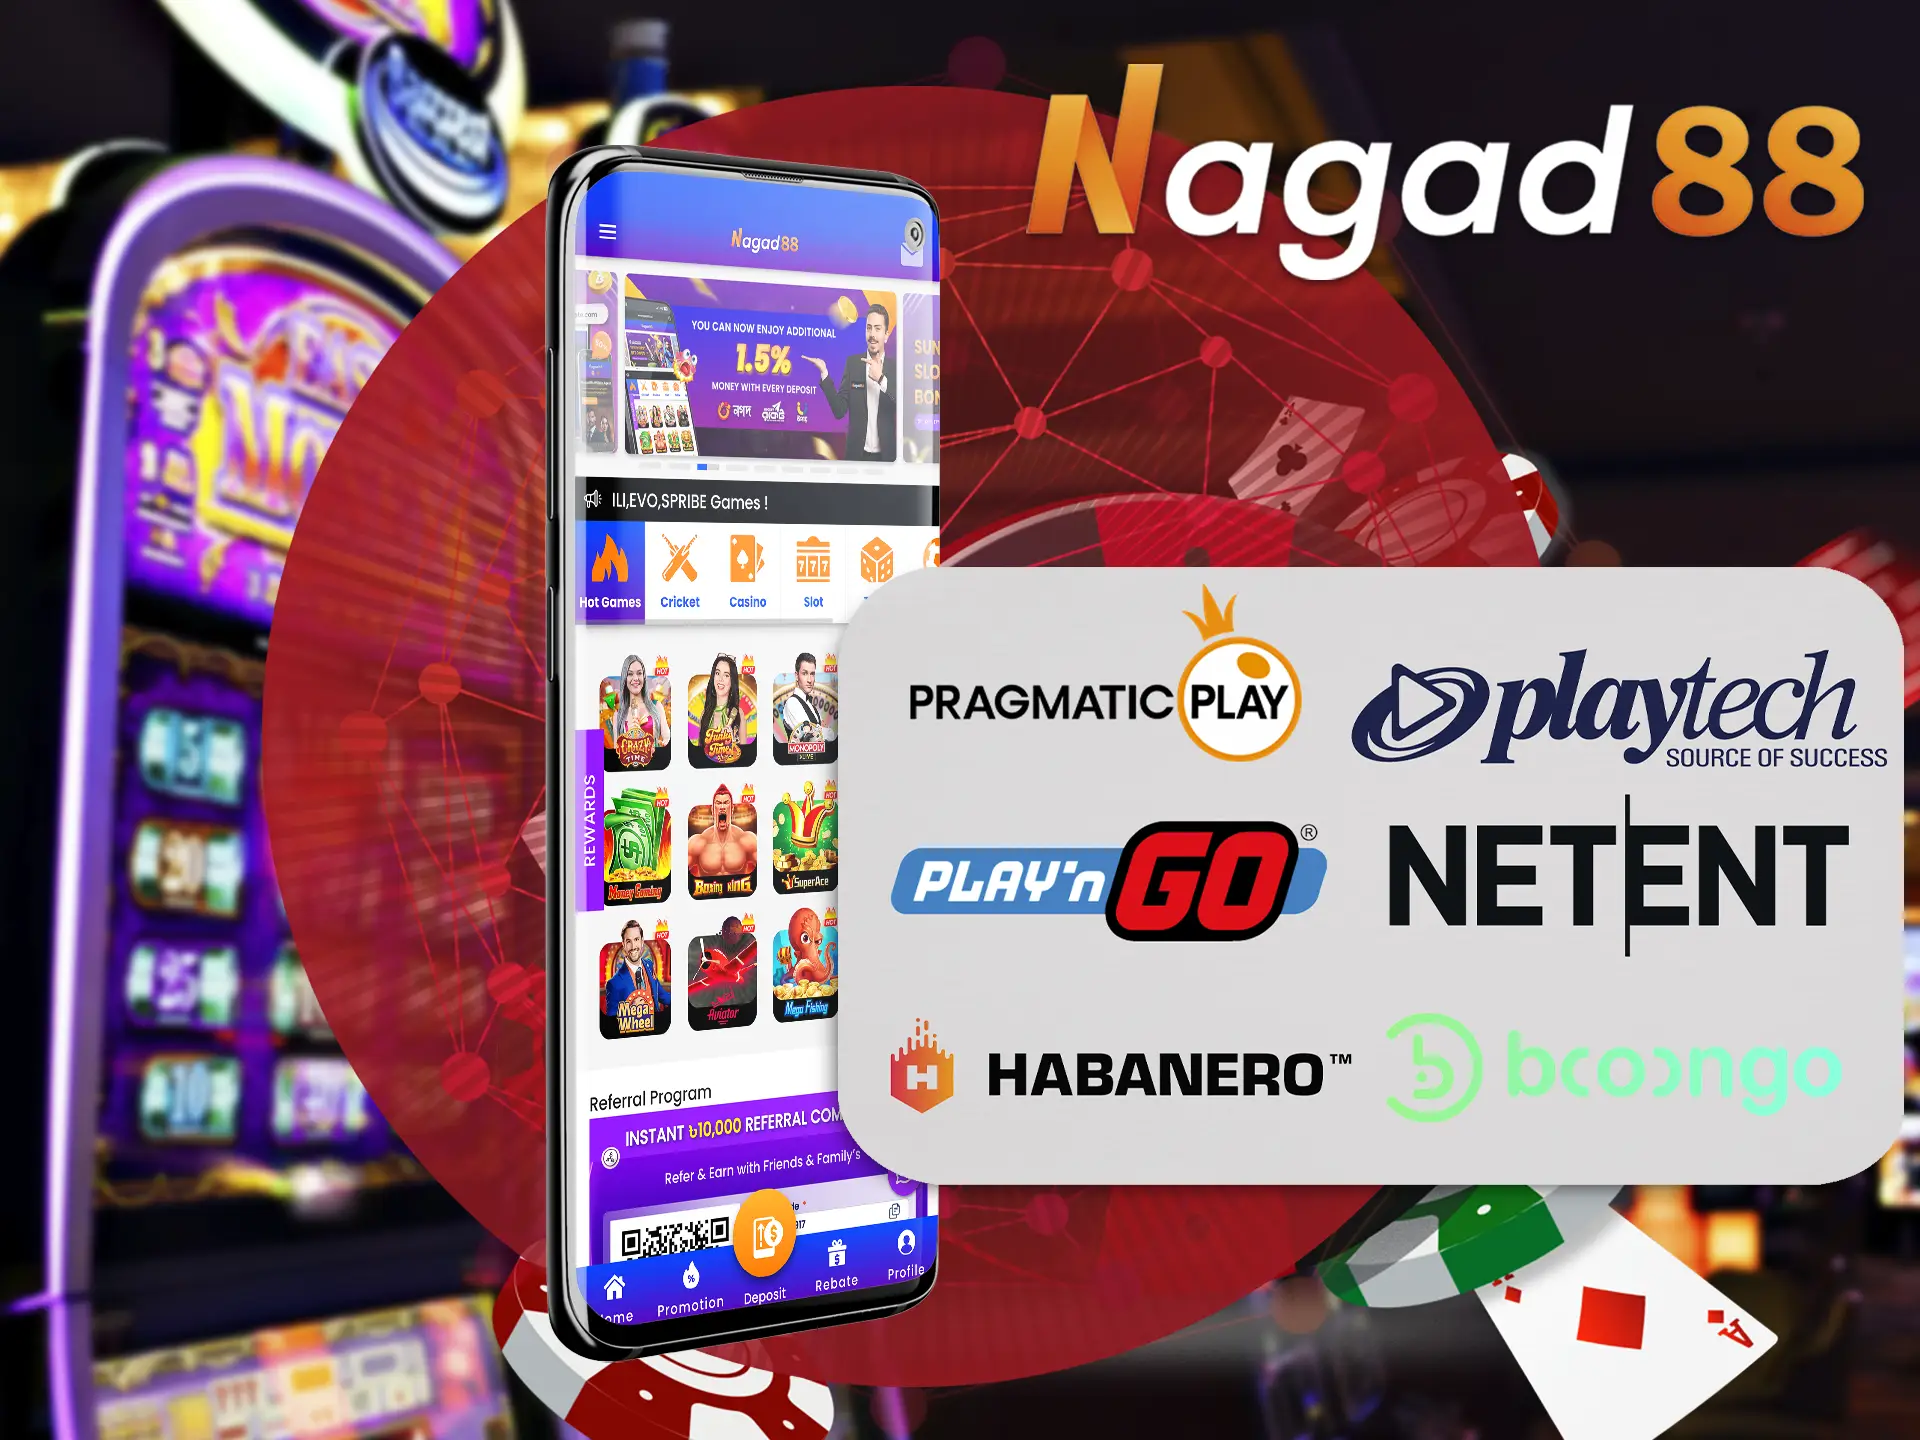 The Nagad88 site employs quality service providers to ensure that you get the most out of your gaming experience.